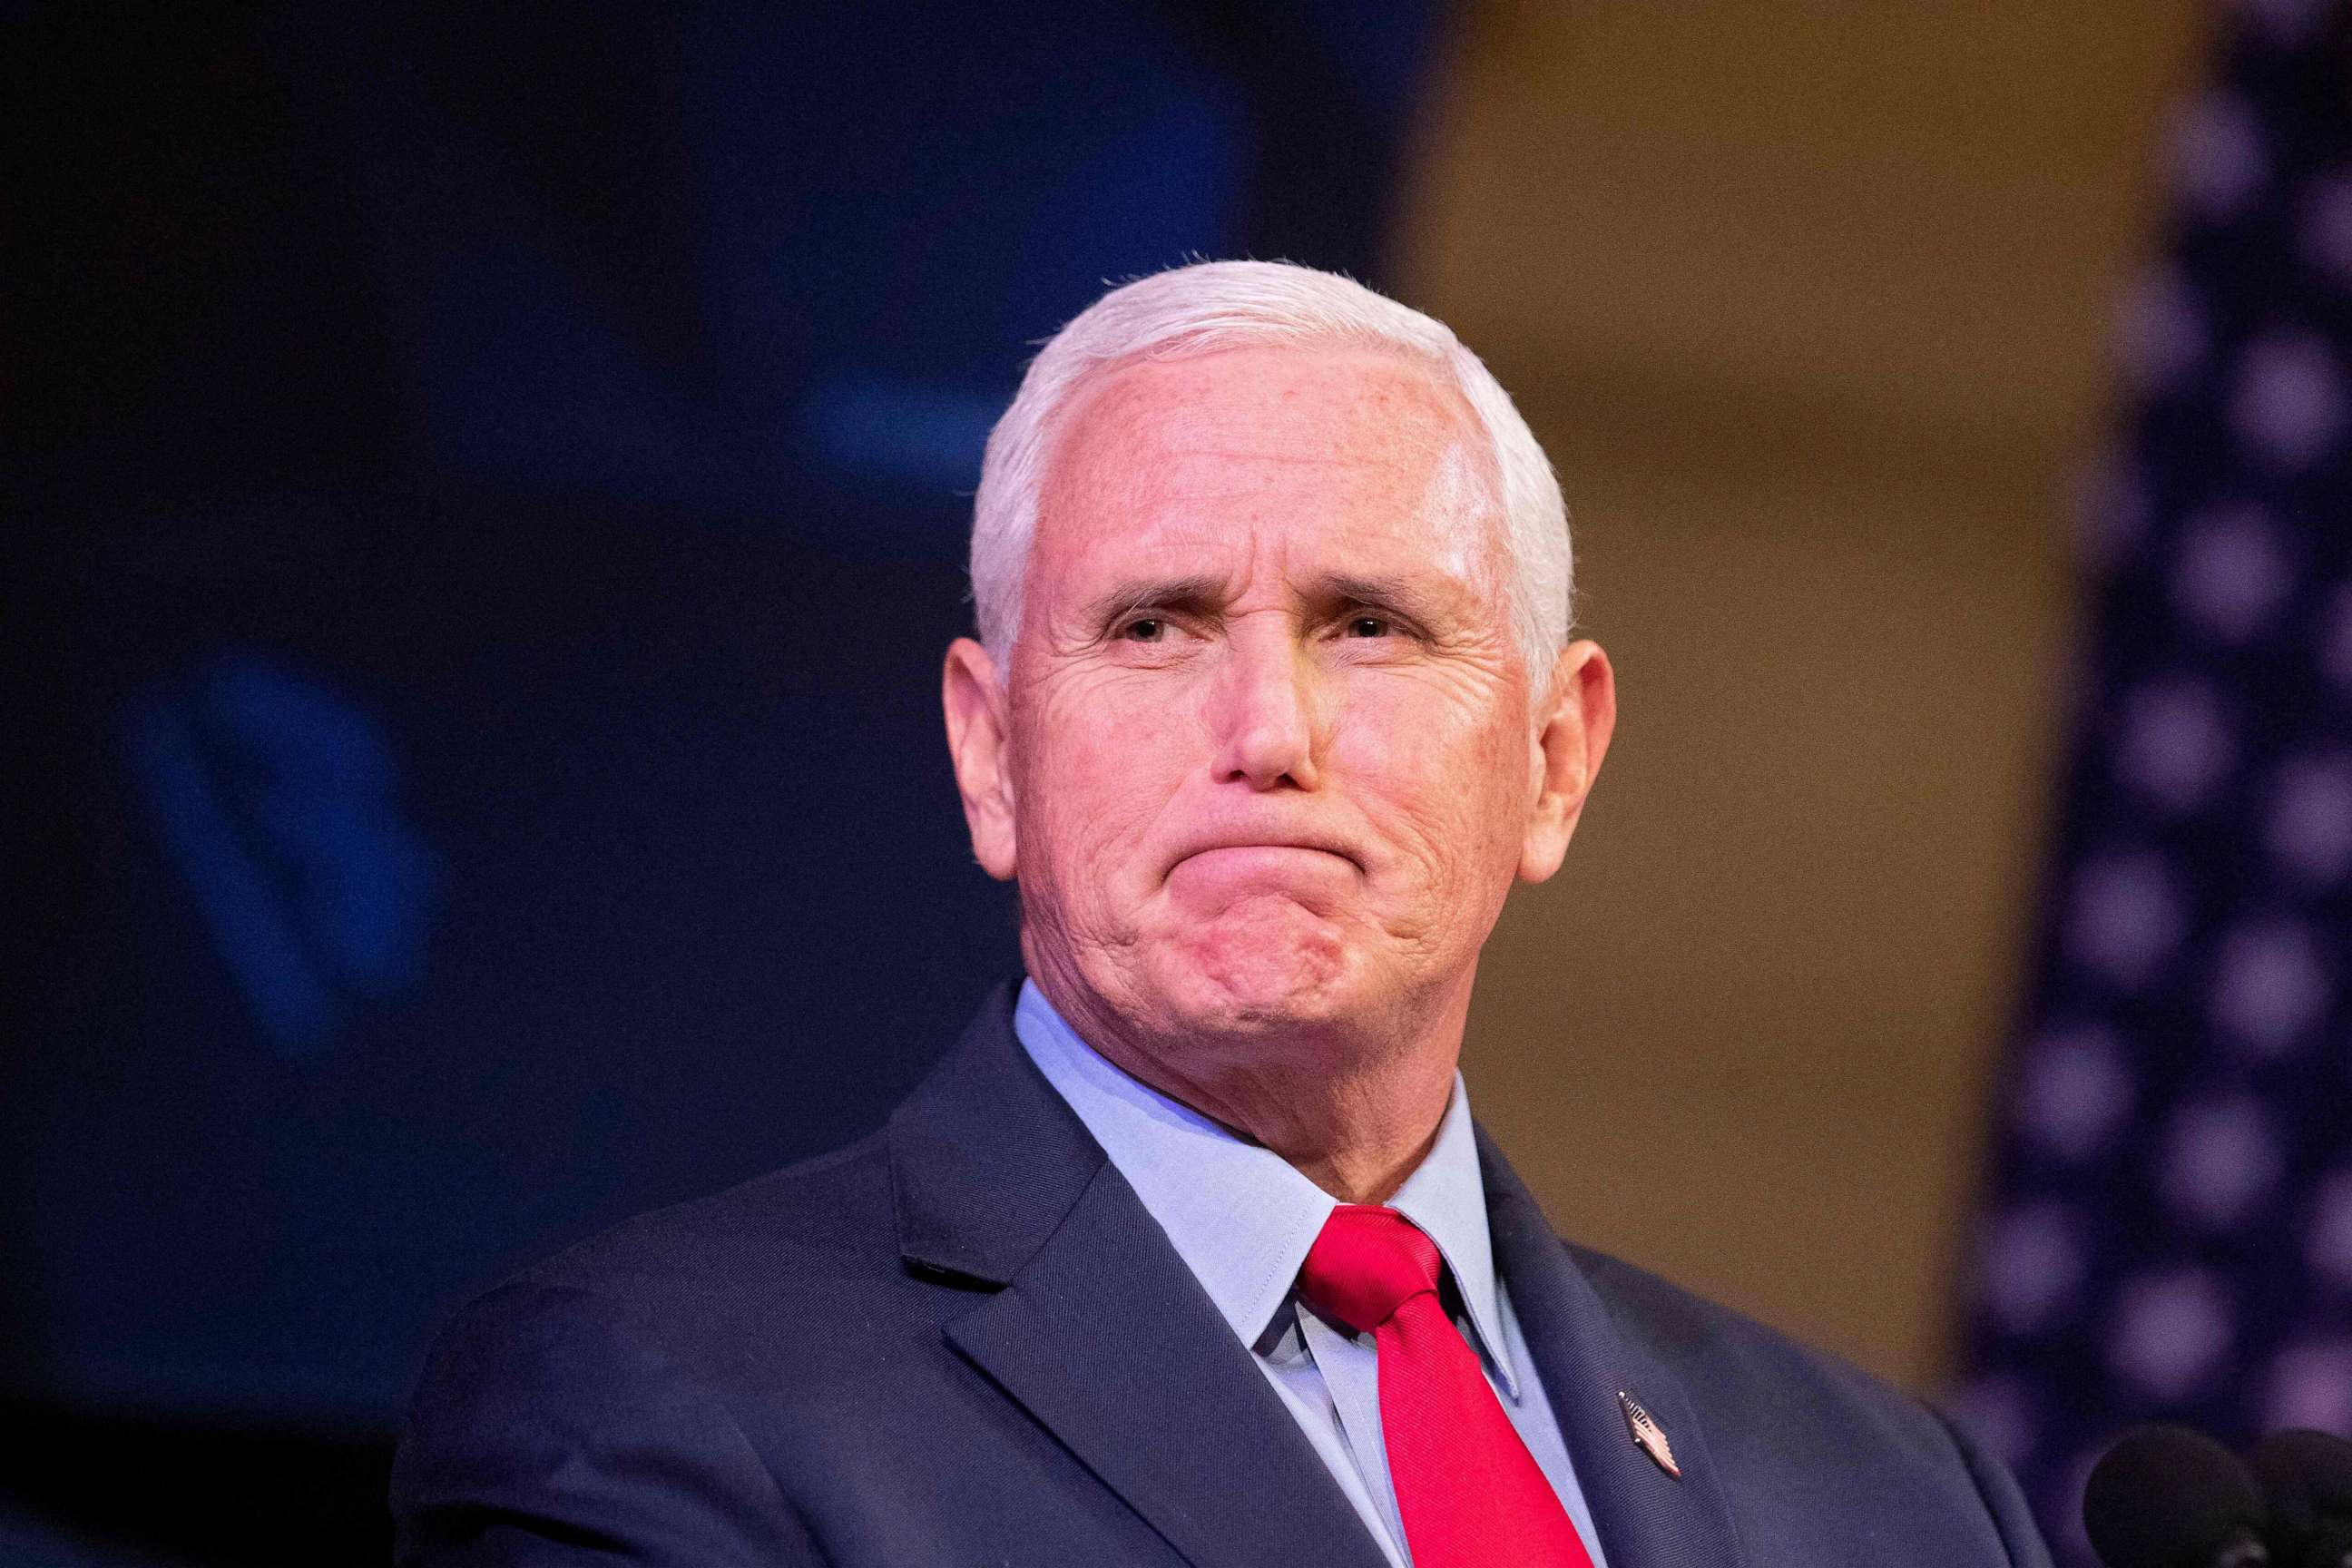 PHOTO: In this file photo taken on April 12, 2022, former Vice President Mike Pence speaks at a campus lecture hosted by Young Americans for Freedom at the University of Virginia in Charlottesville, Va.